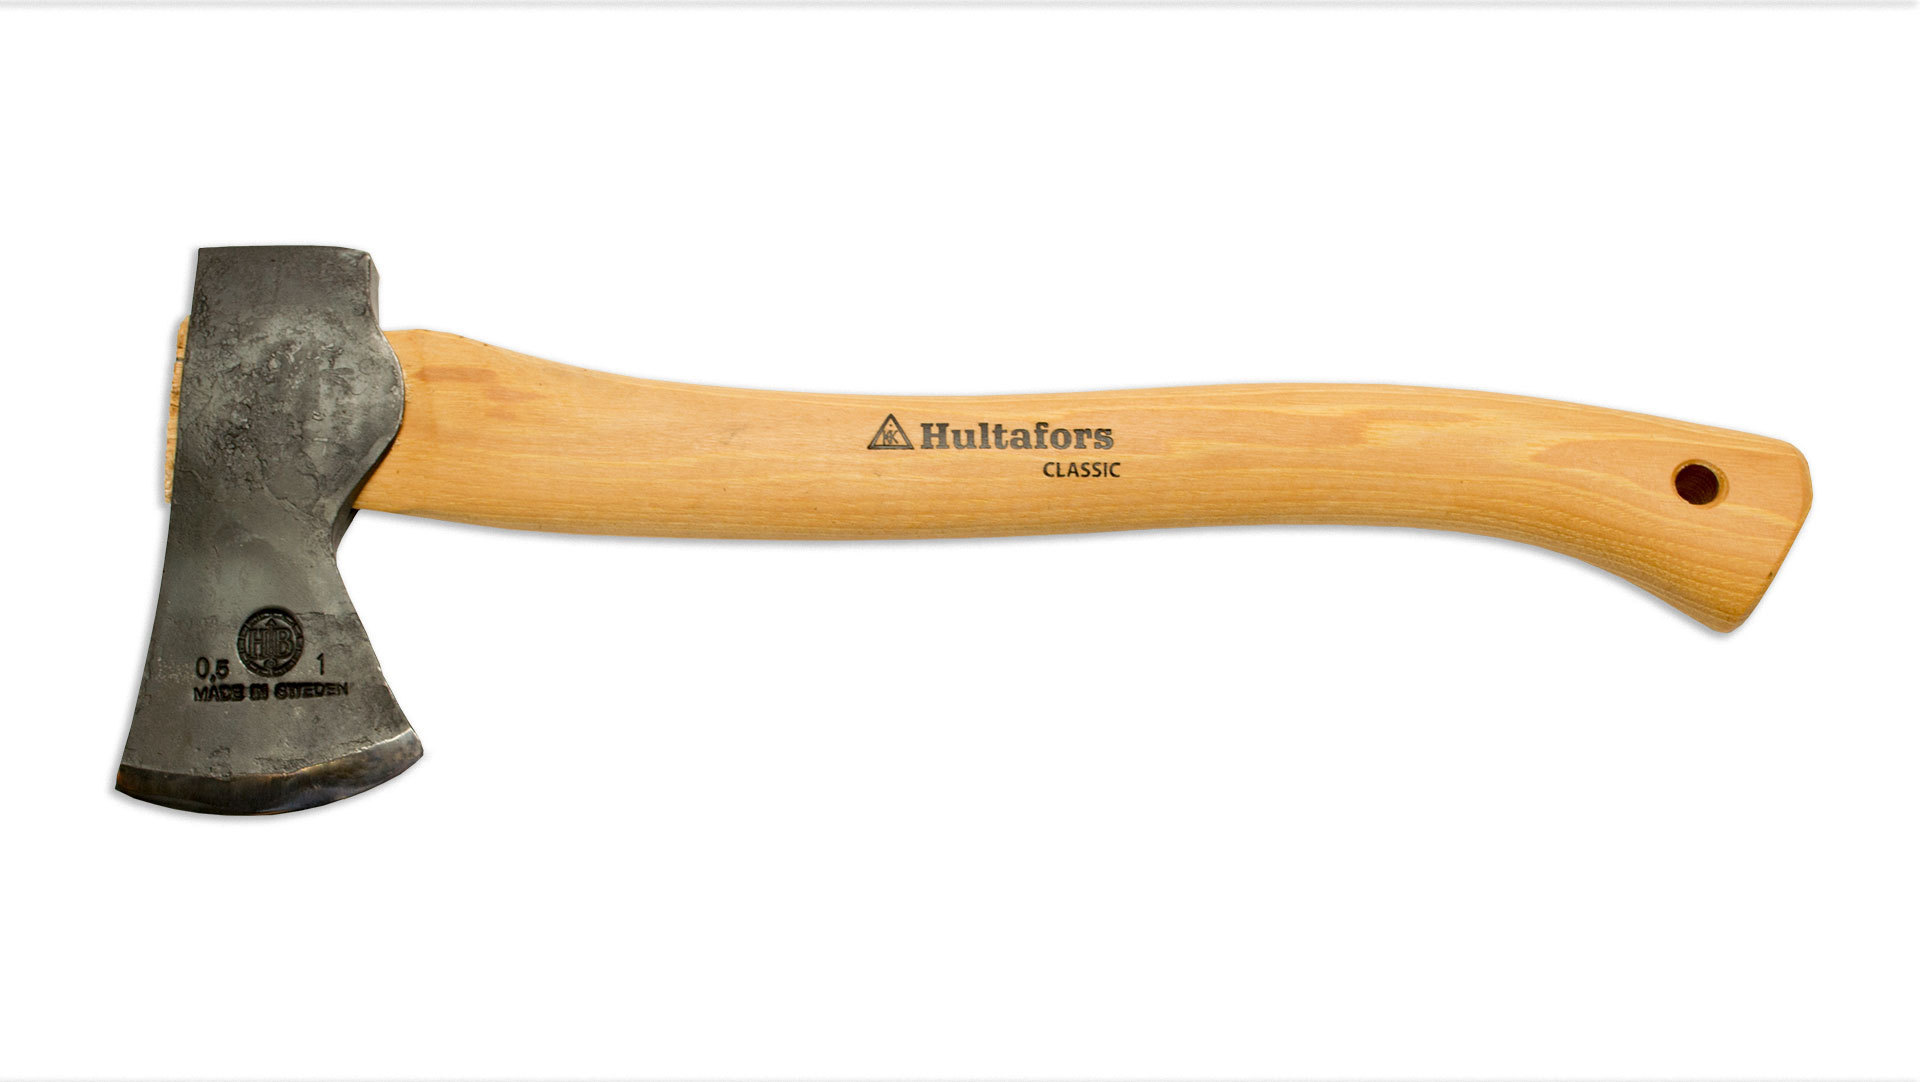 Eagle Professional Traditions holzaxt 1000 G with 600 mm Hickory Wood Shaft-Hatchet Axe 